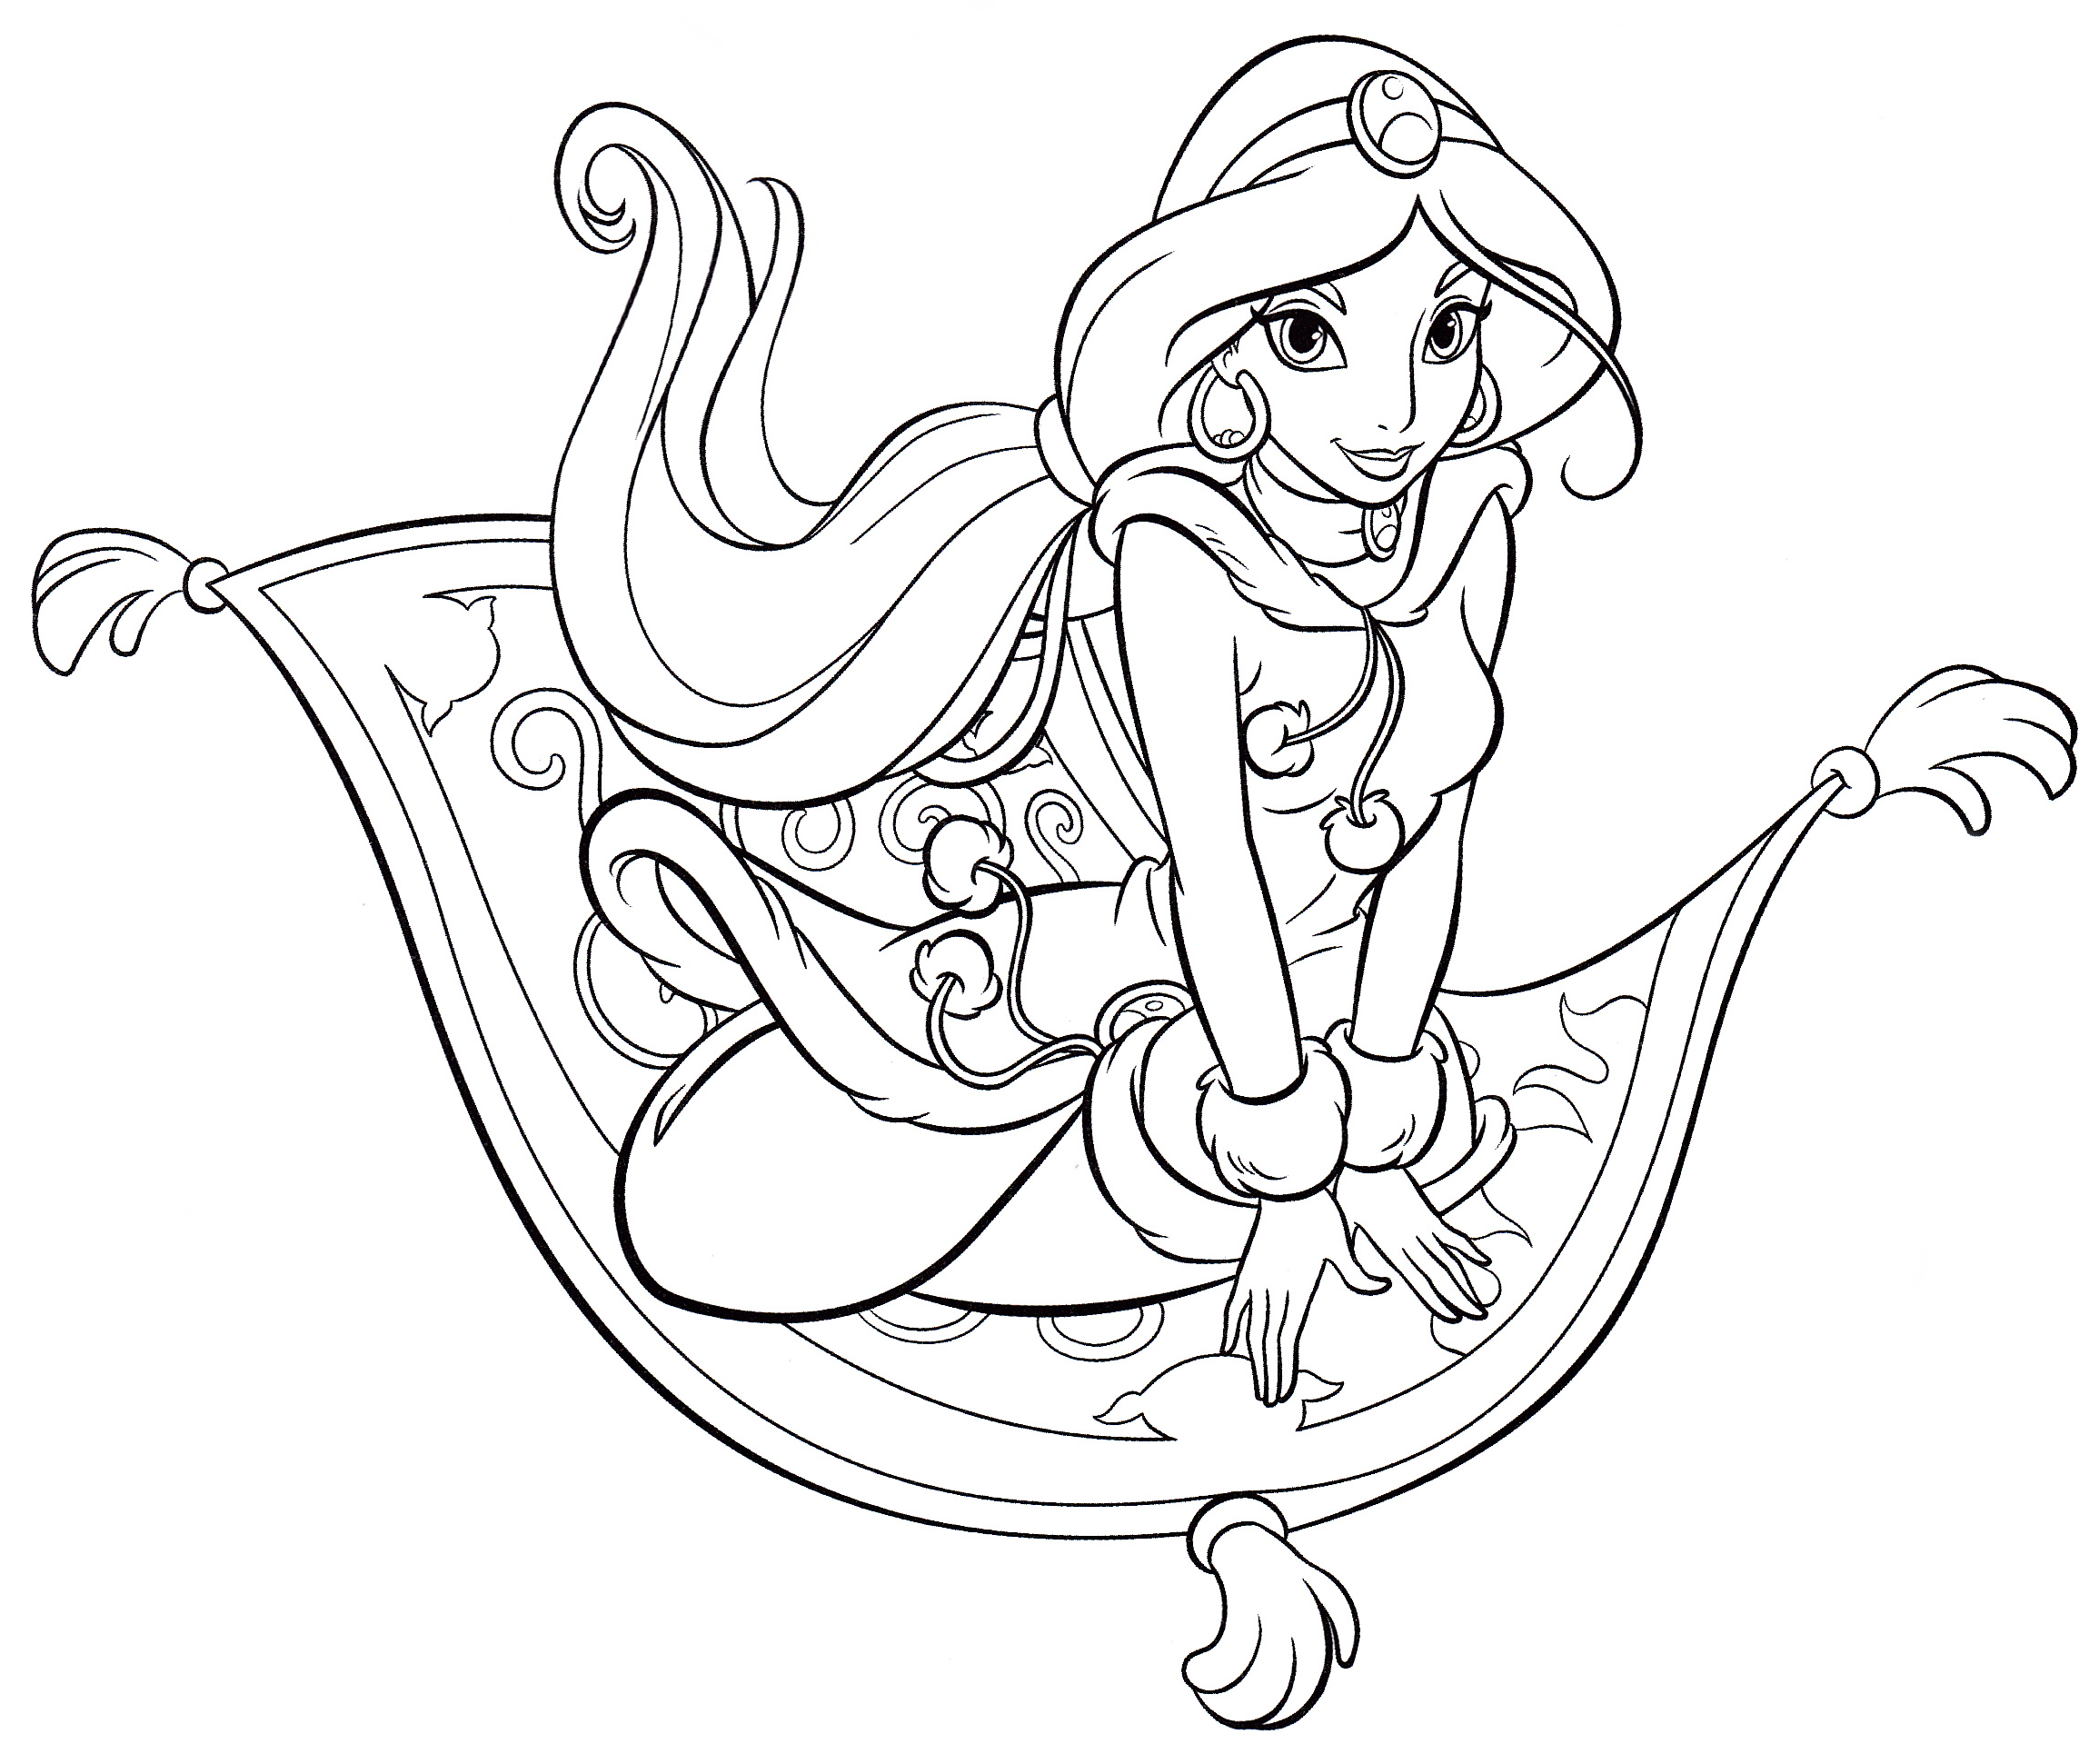 Coloring pages walt disney coloring pages walt disney characters